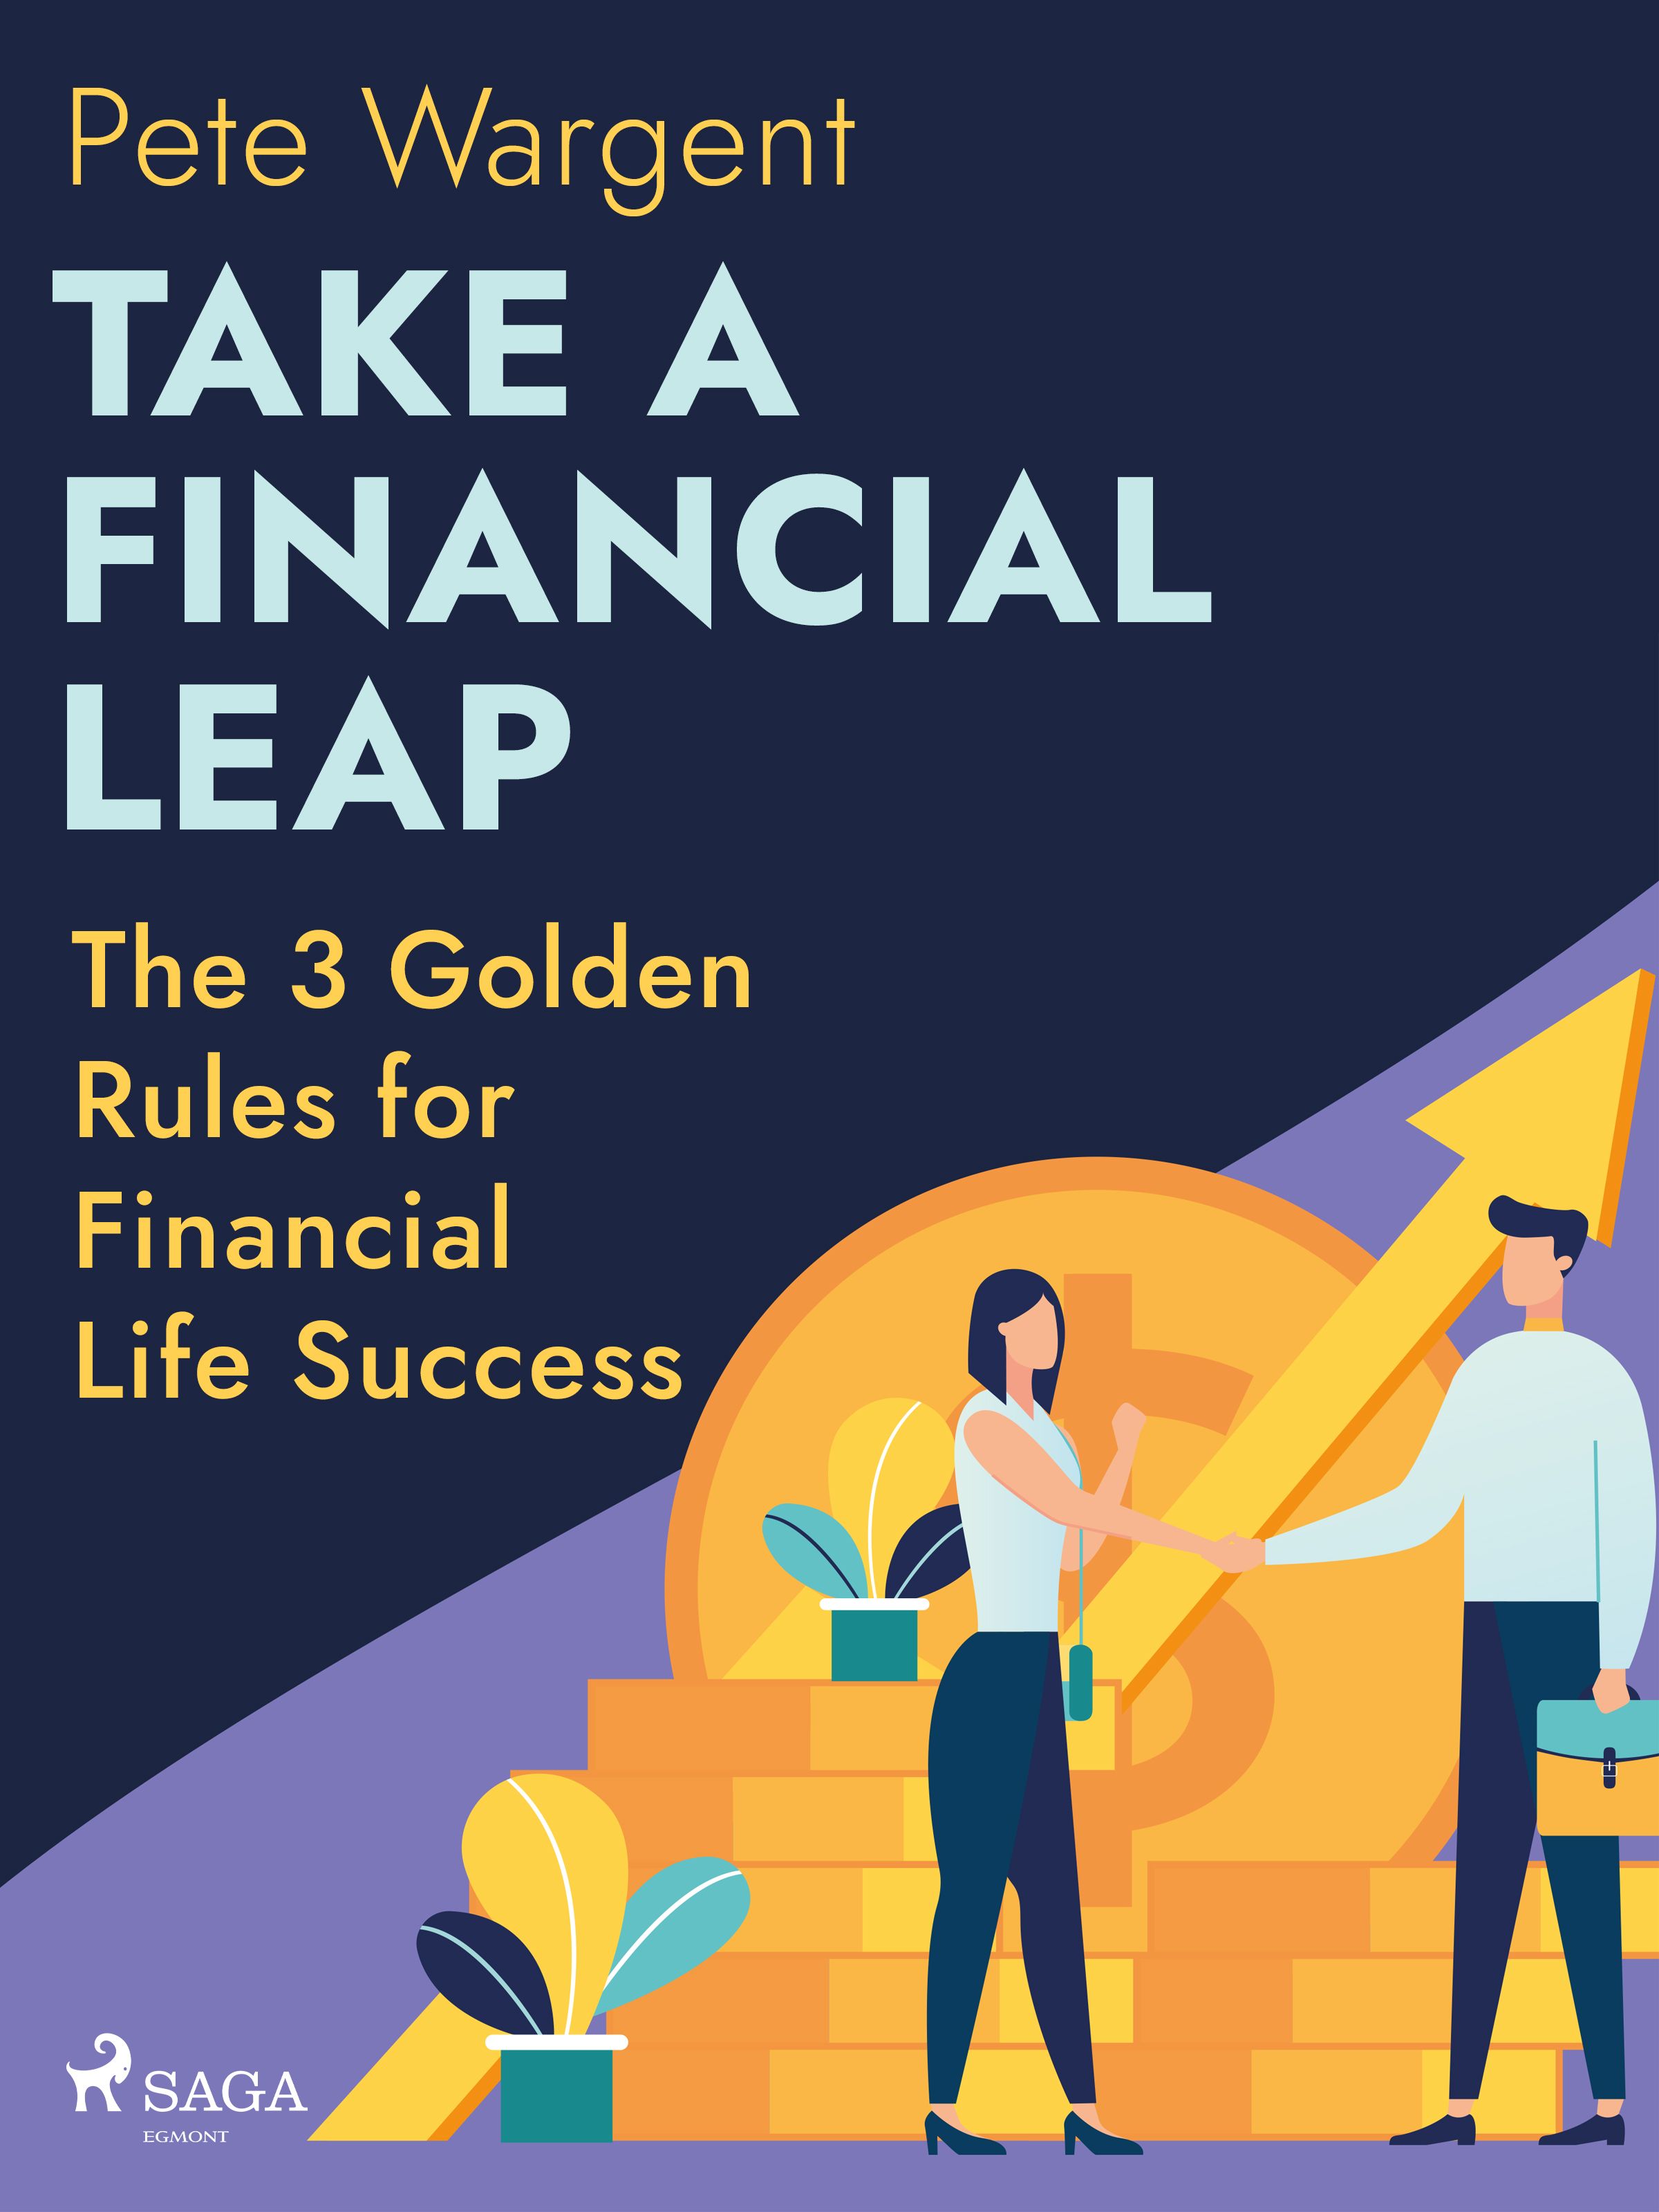 Take a Financial Leap: The 3 Golden Rules for Financial Life Success, eBook by Pete Wargent